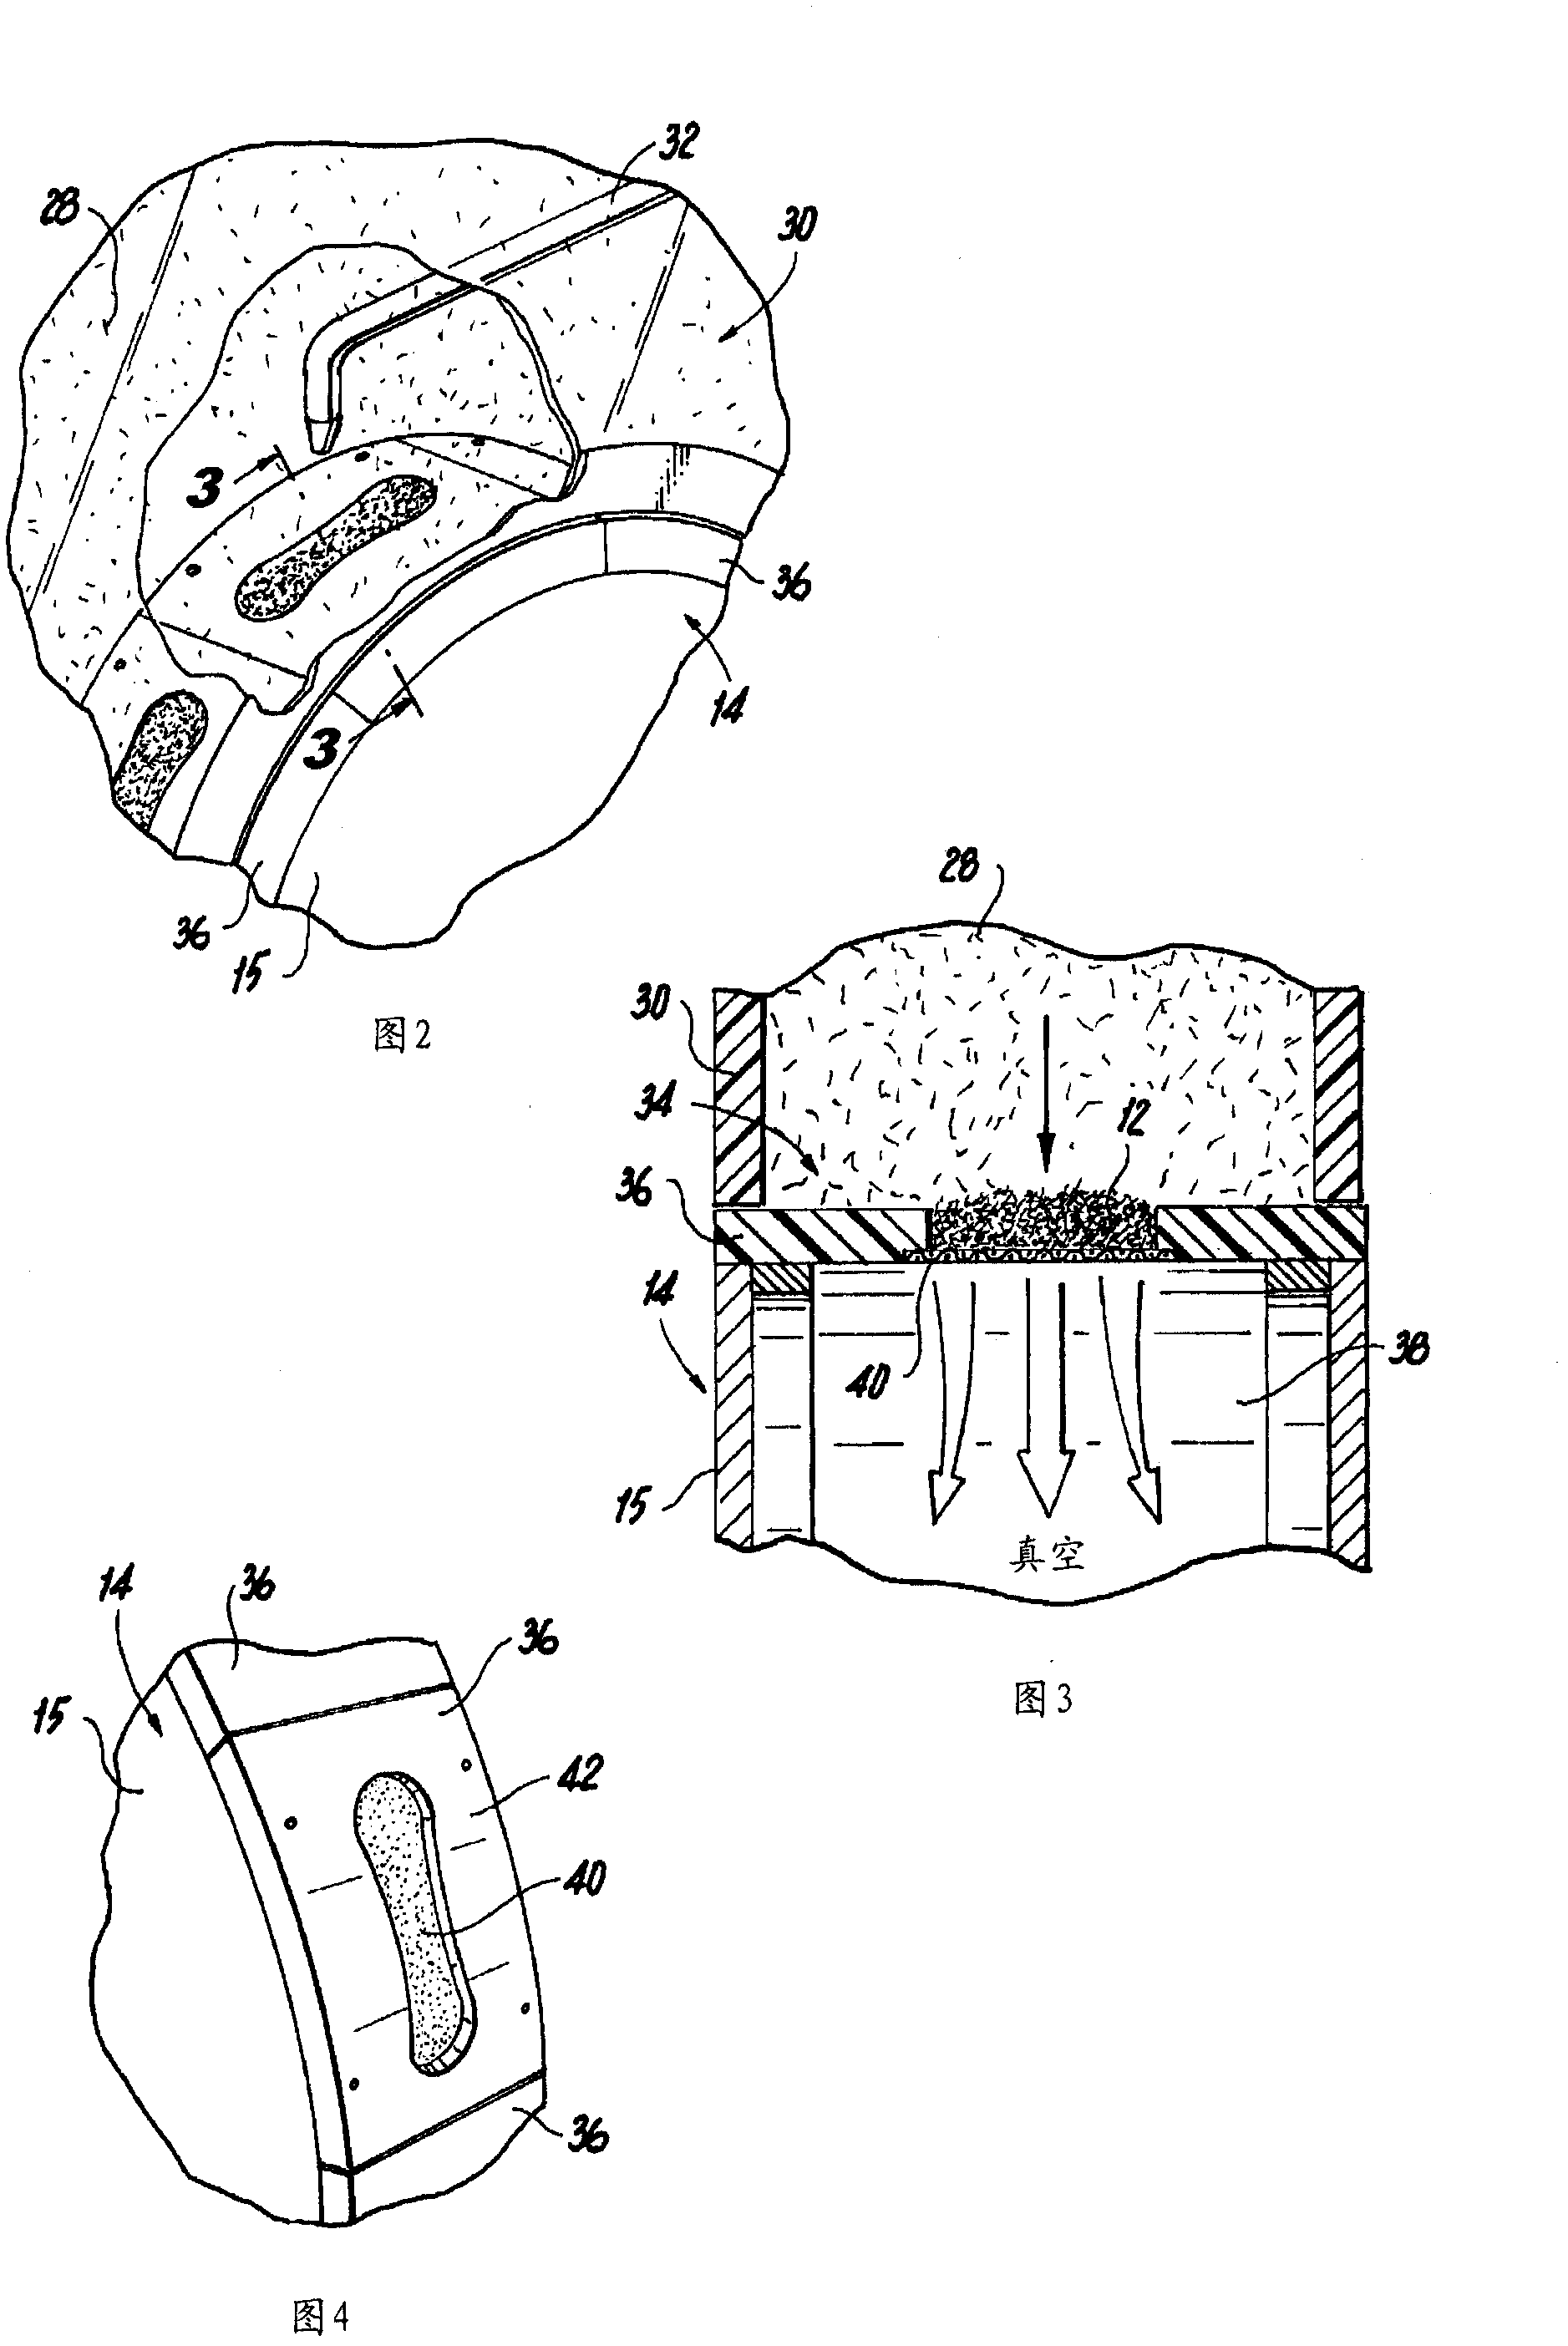 Apparatus for making a fibrous article having a three dimensional profile